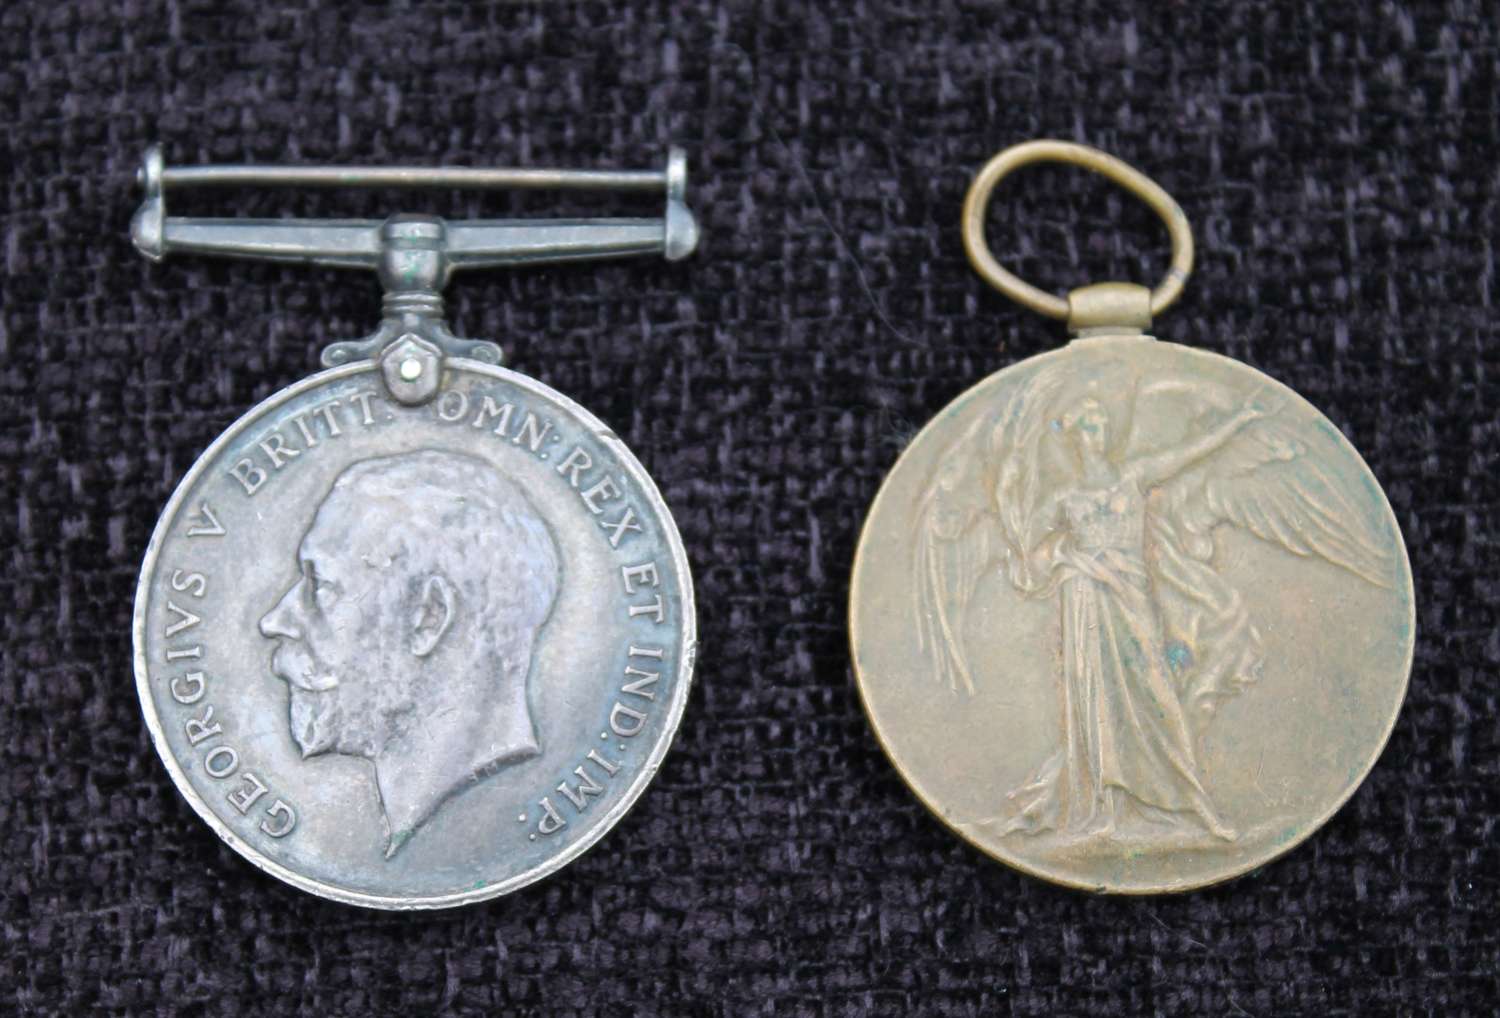 Army Veterinary Corps Medals Carey